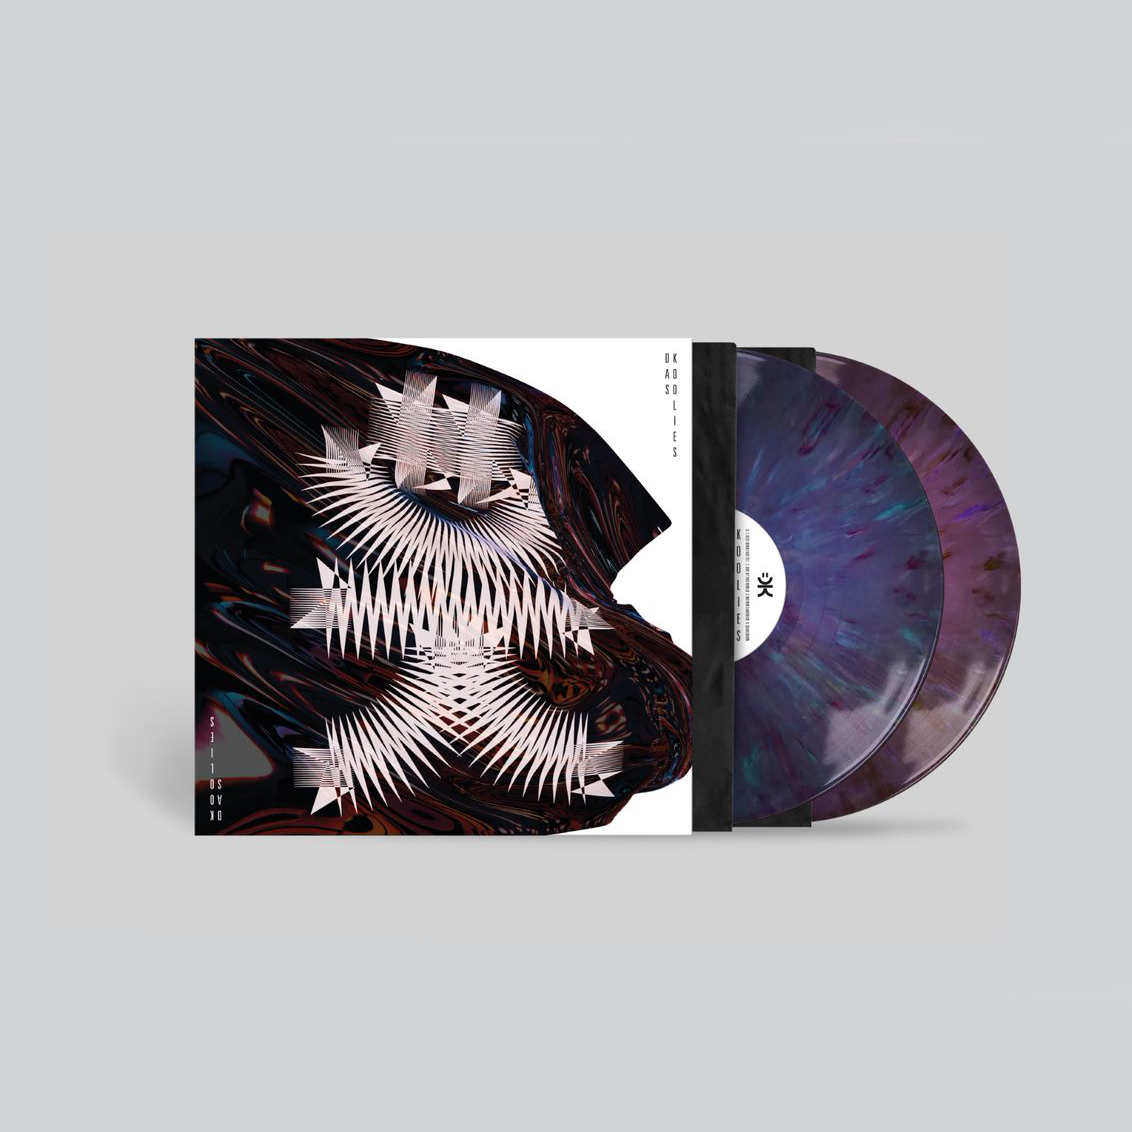 DK.01: Limited Edition Recycled Colour Vinyl 2LP + Exclusive Signed Print [100 Copies Available]